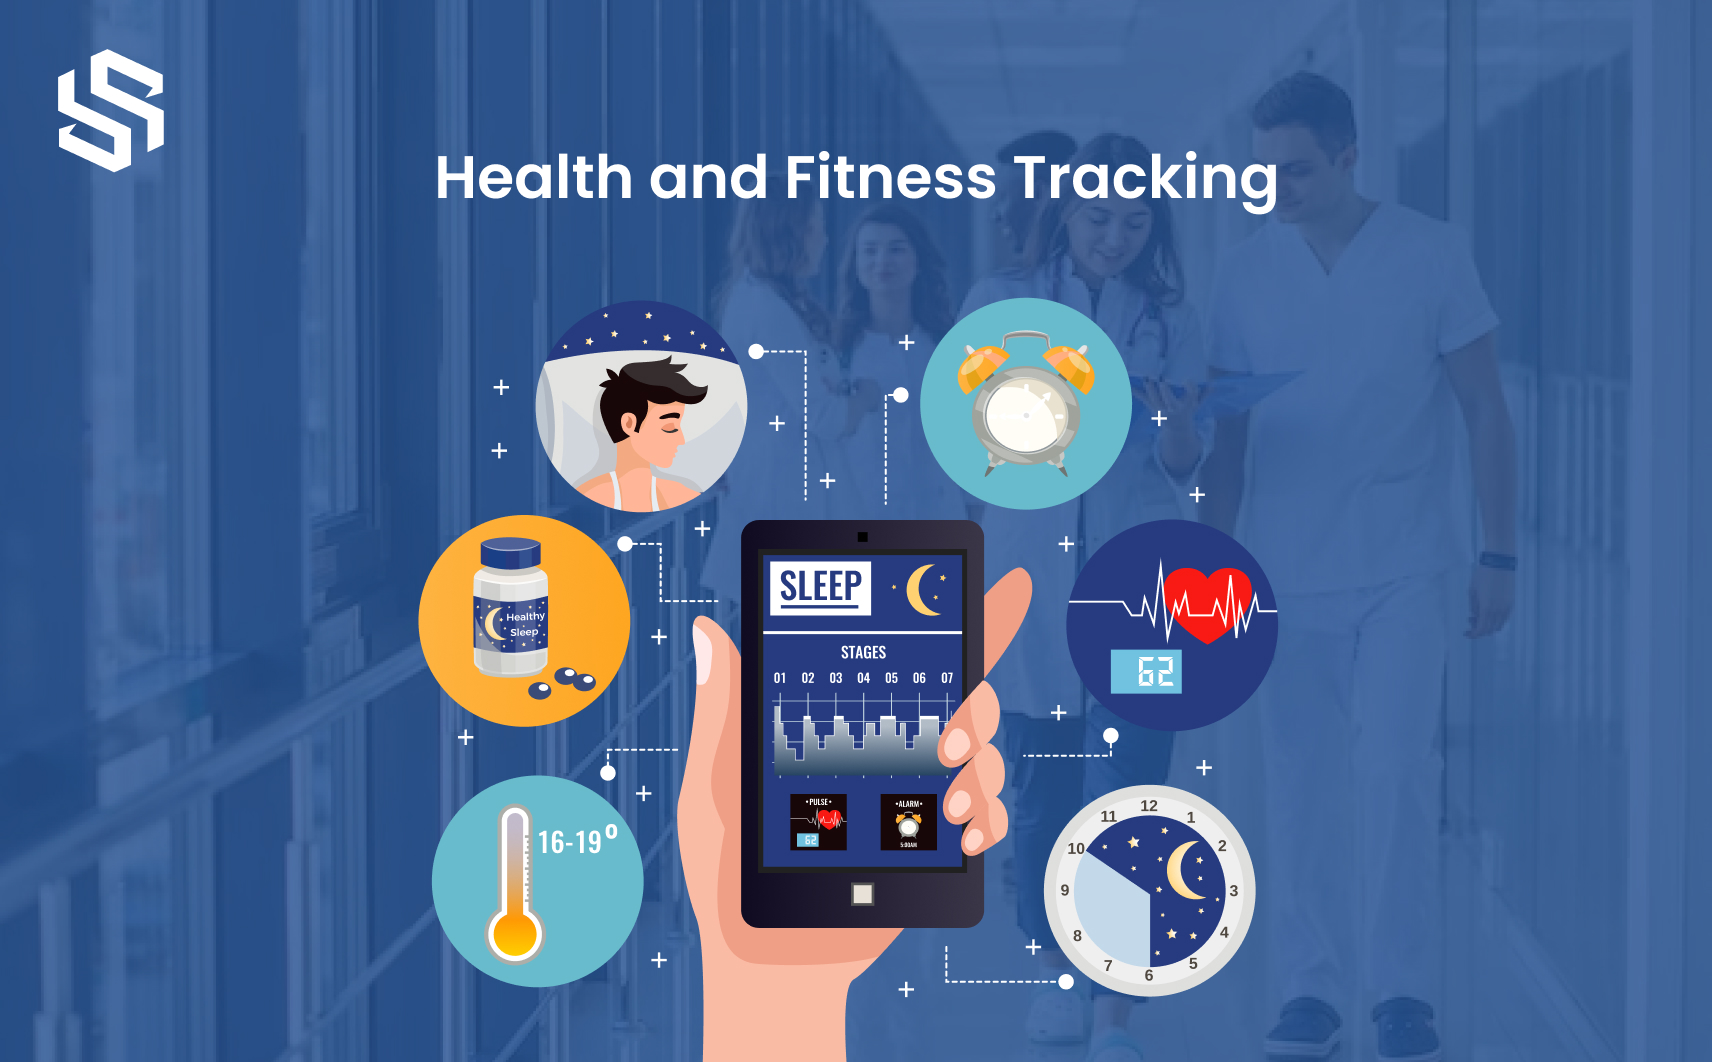 Health and fitness tracking